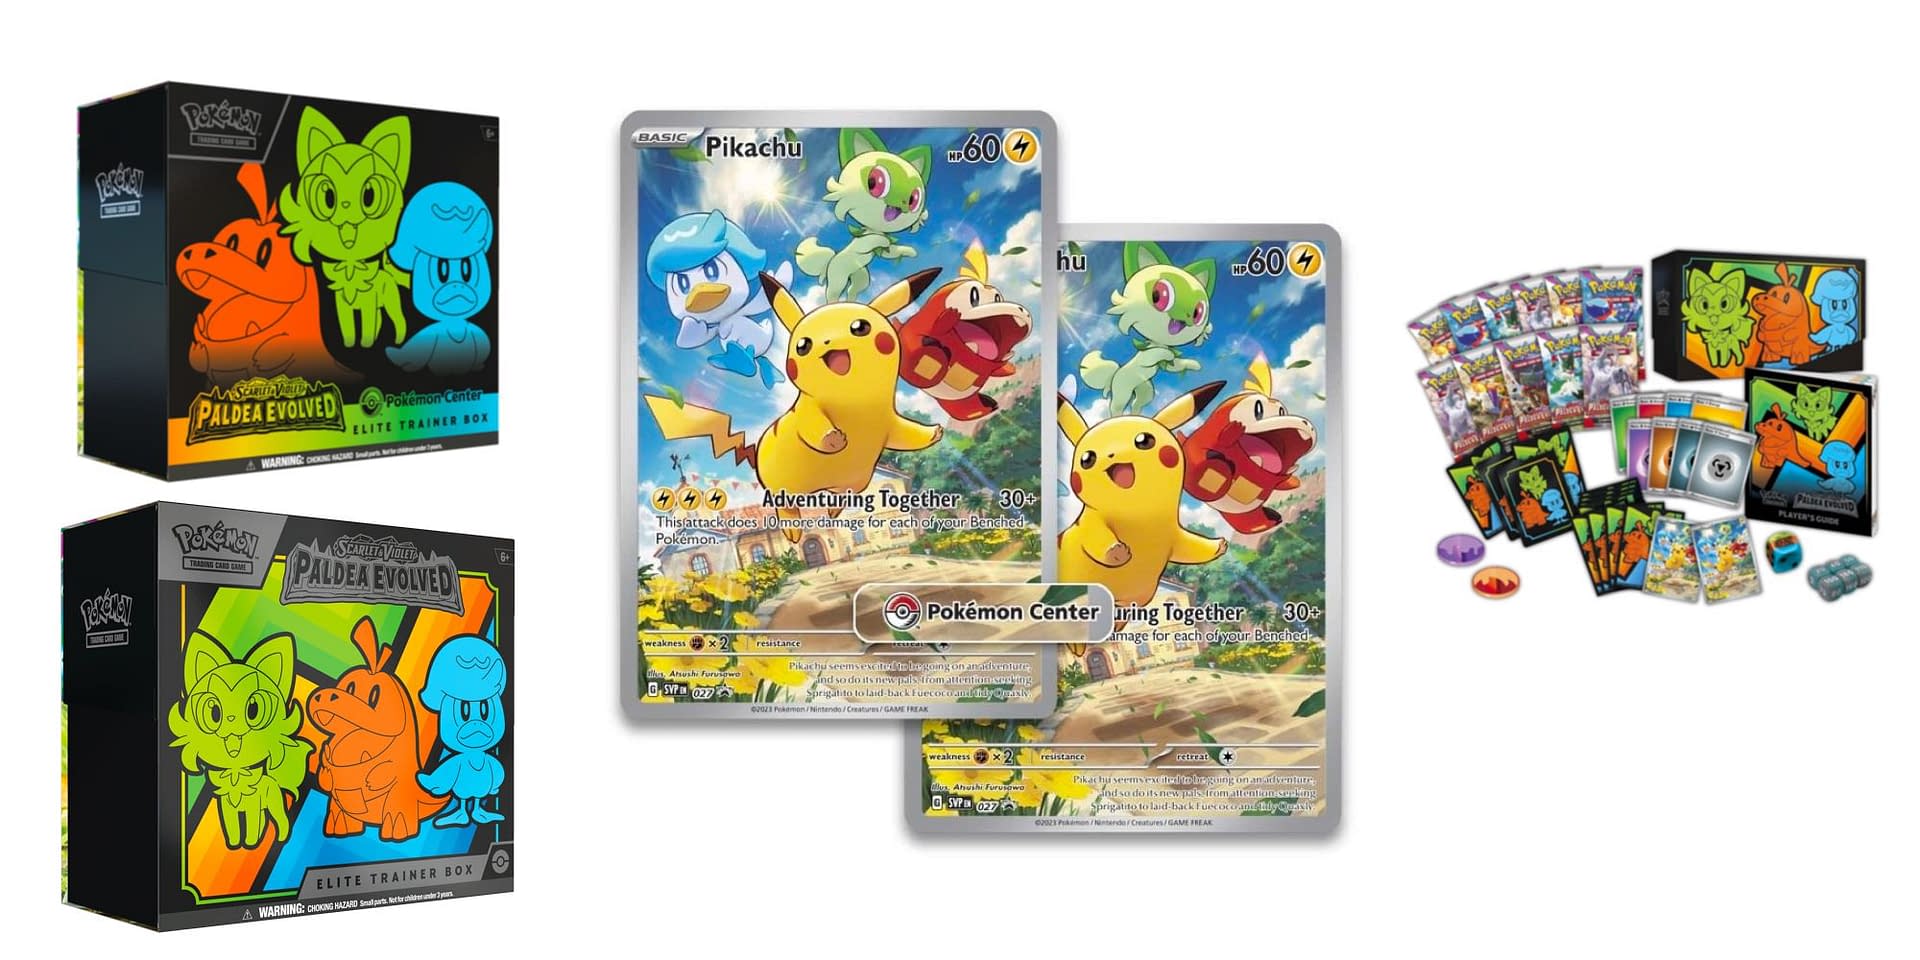 Cyclizar, Loaded Dice, and More Revealed from Pokemon Scarlet & Pokemon  Violet!